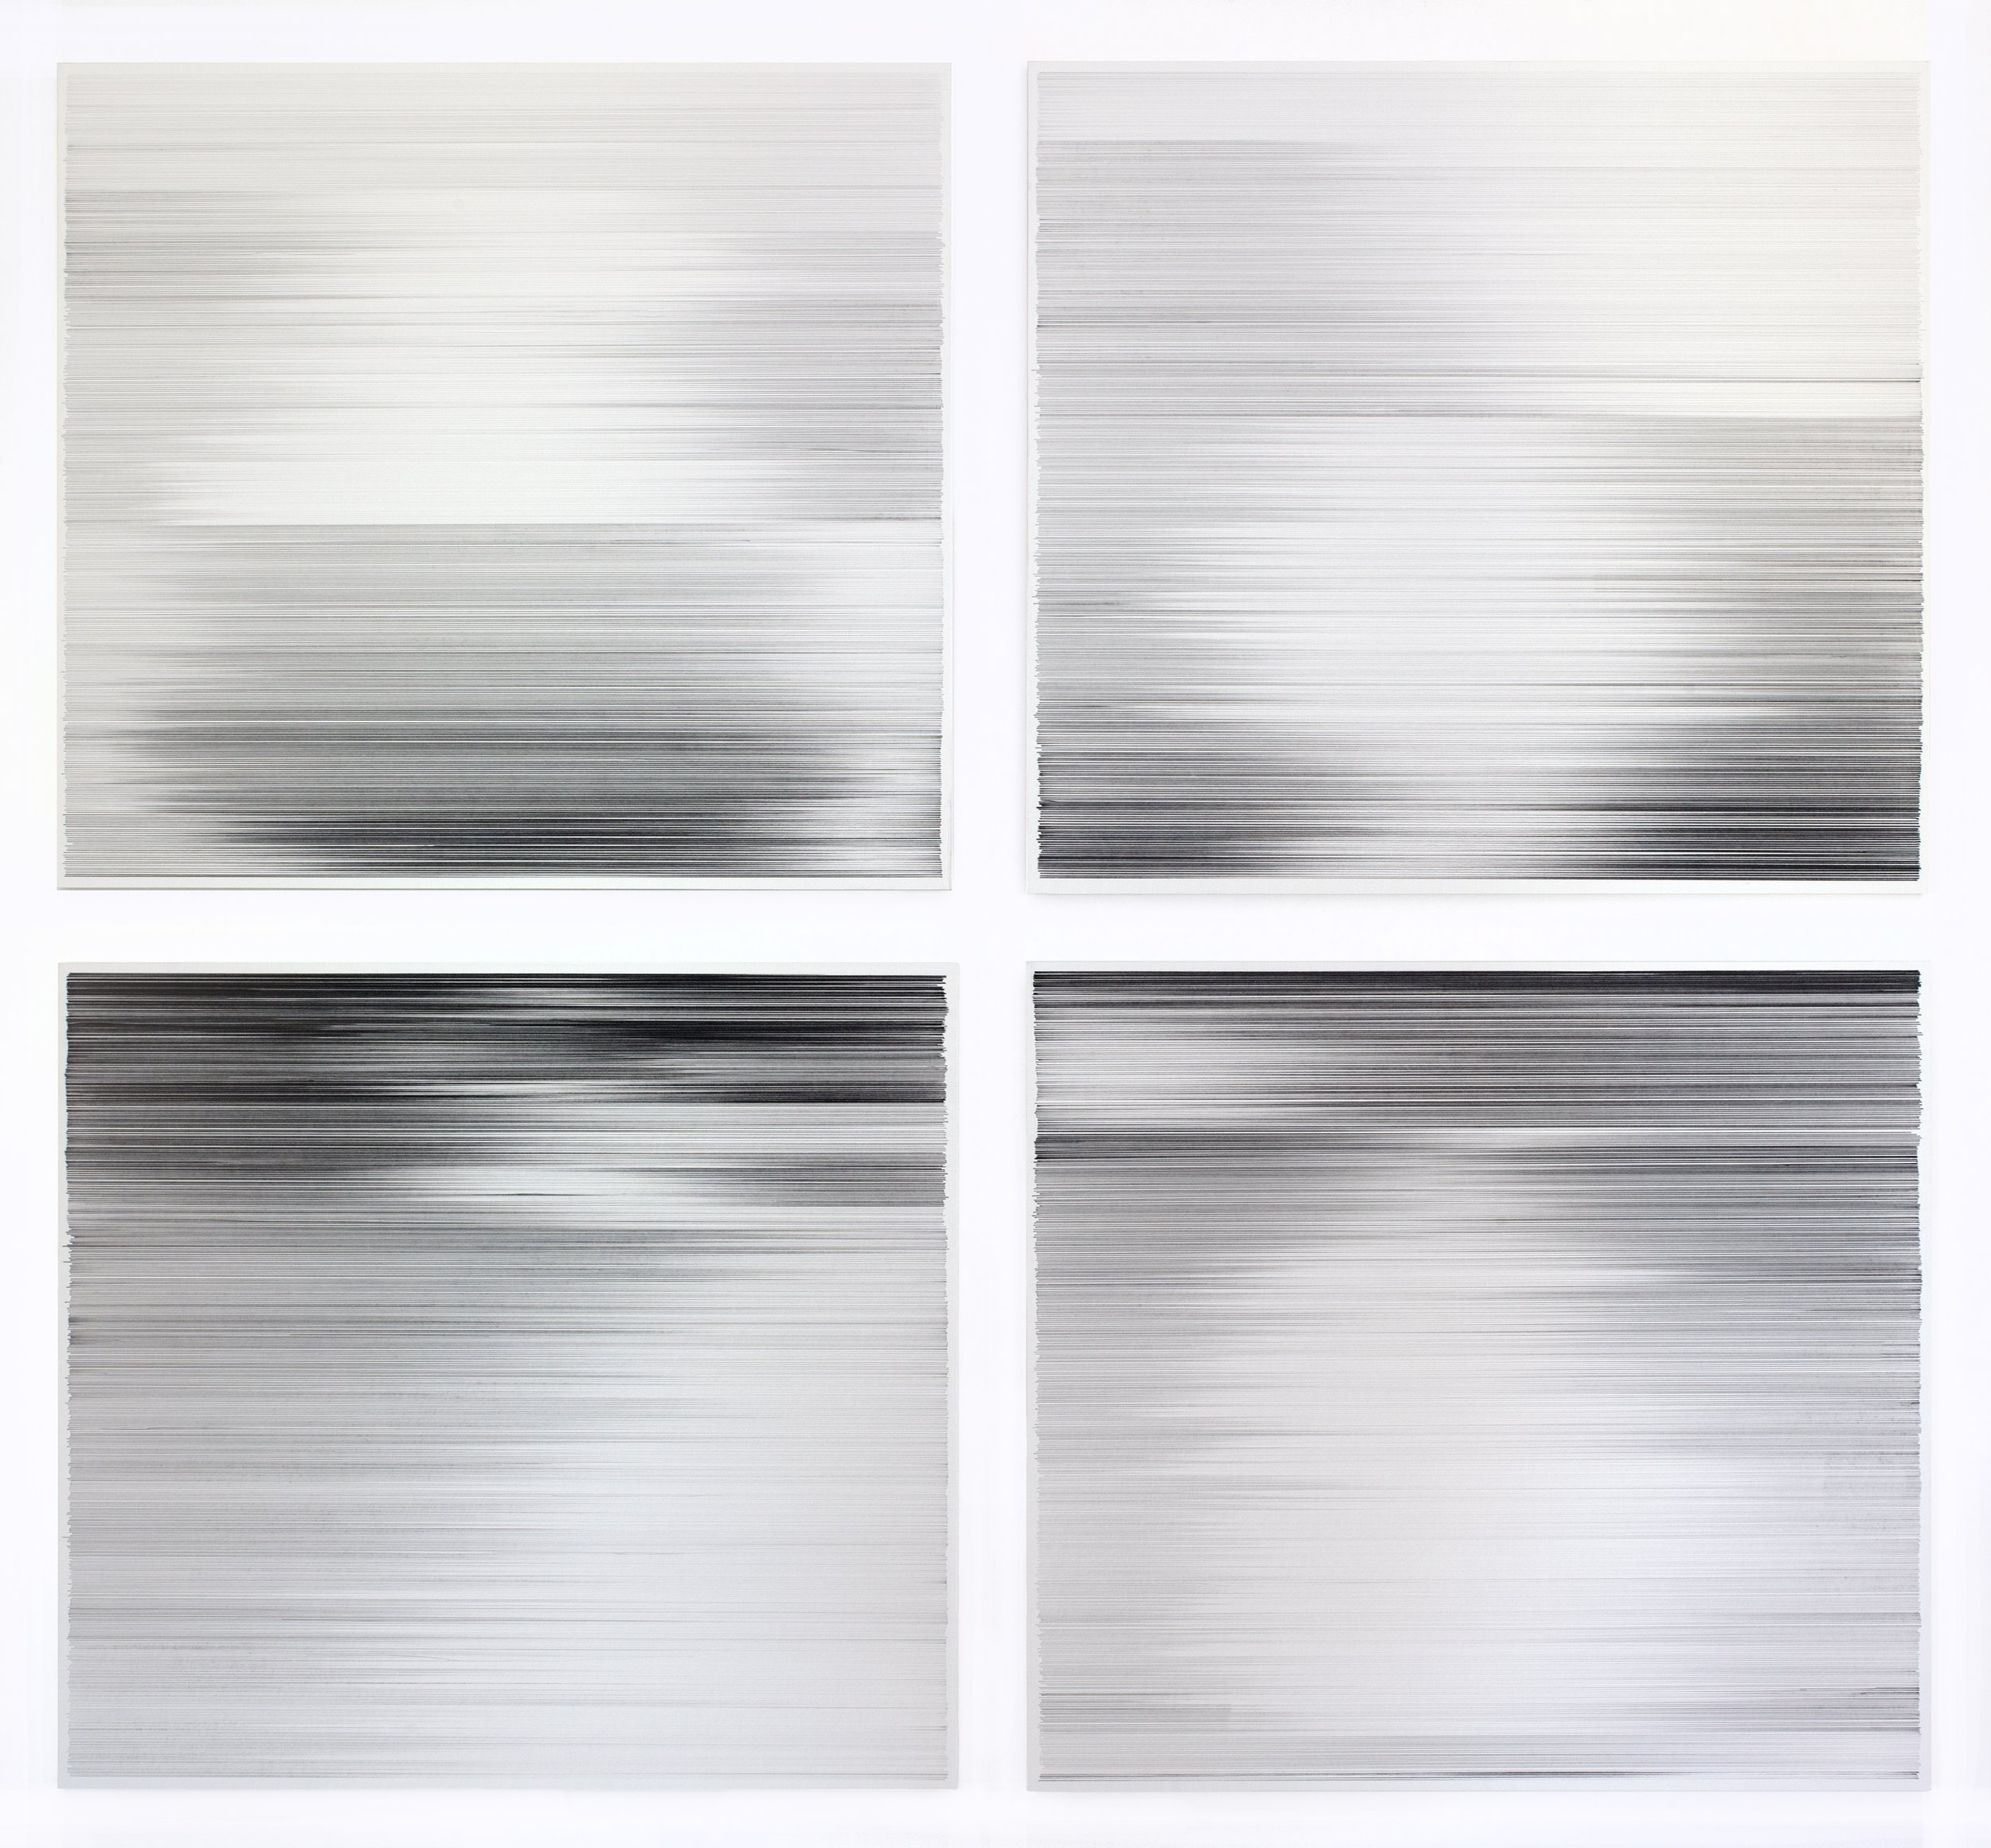    indistinguishable   2023 graphite on mat board 58 x 50 inches (in four panels) 